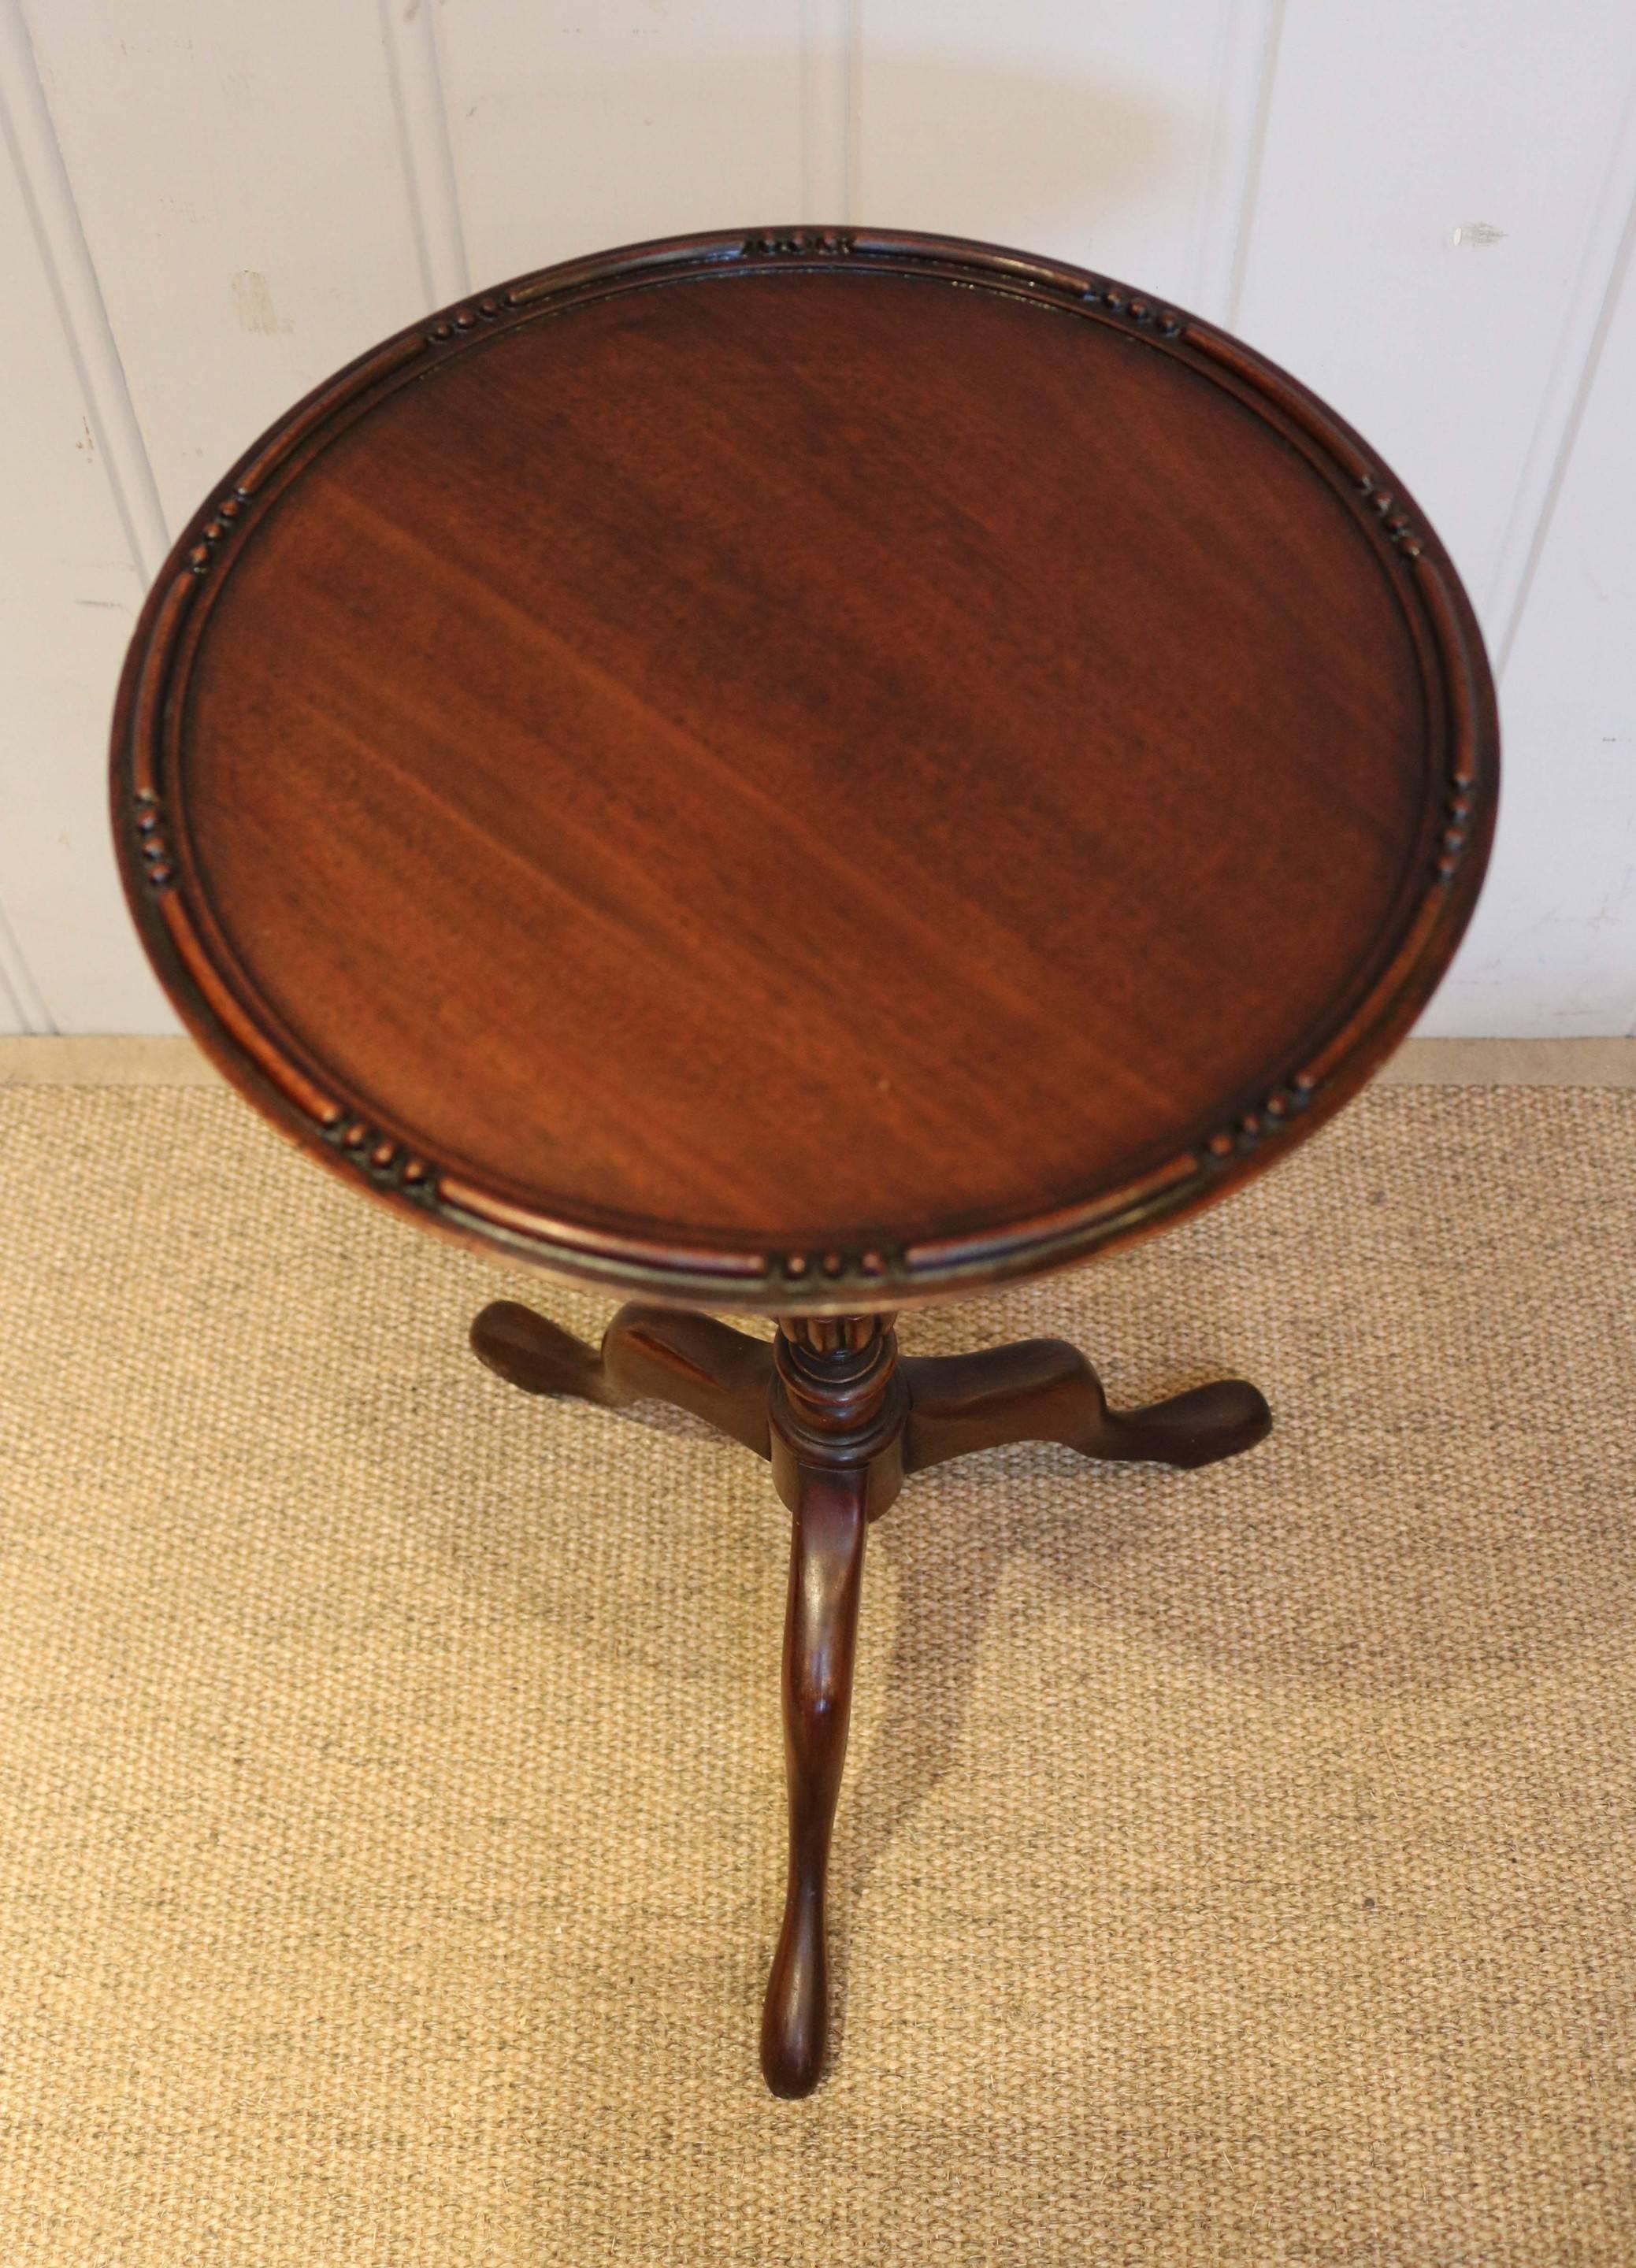 Matched pair of mahogany wine tables having a turned tripod base with fluted carving. One of the tables is slightly smaller at 52 cm high.